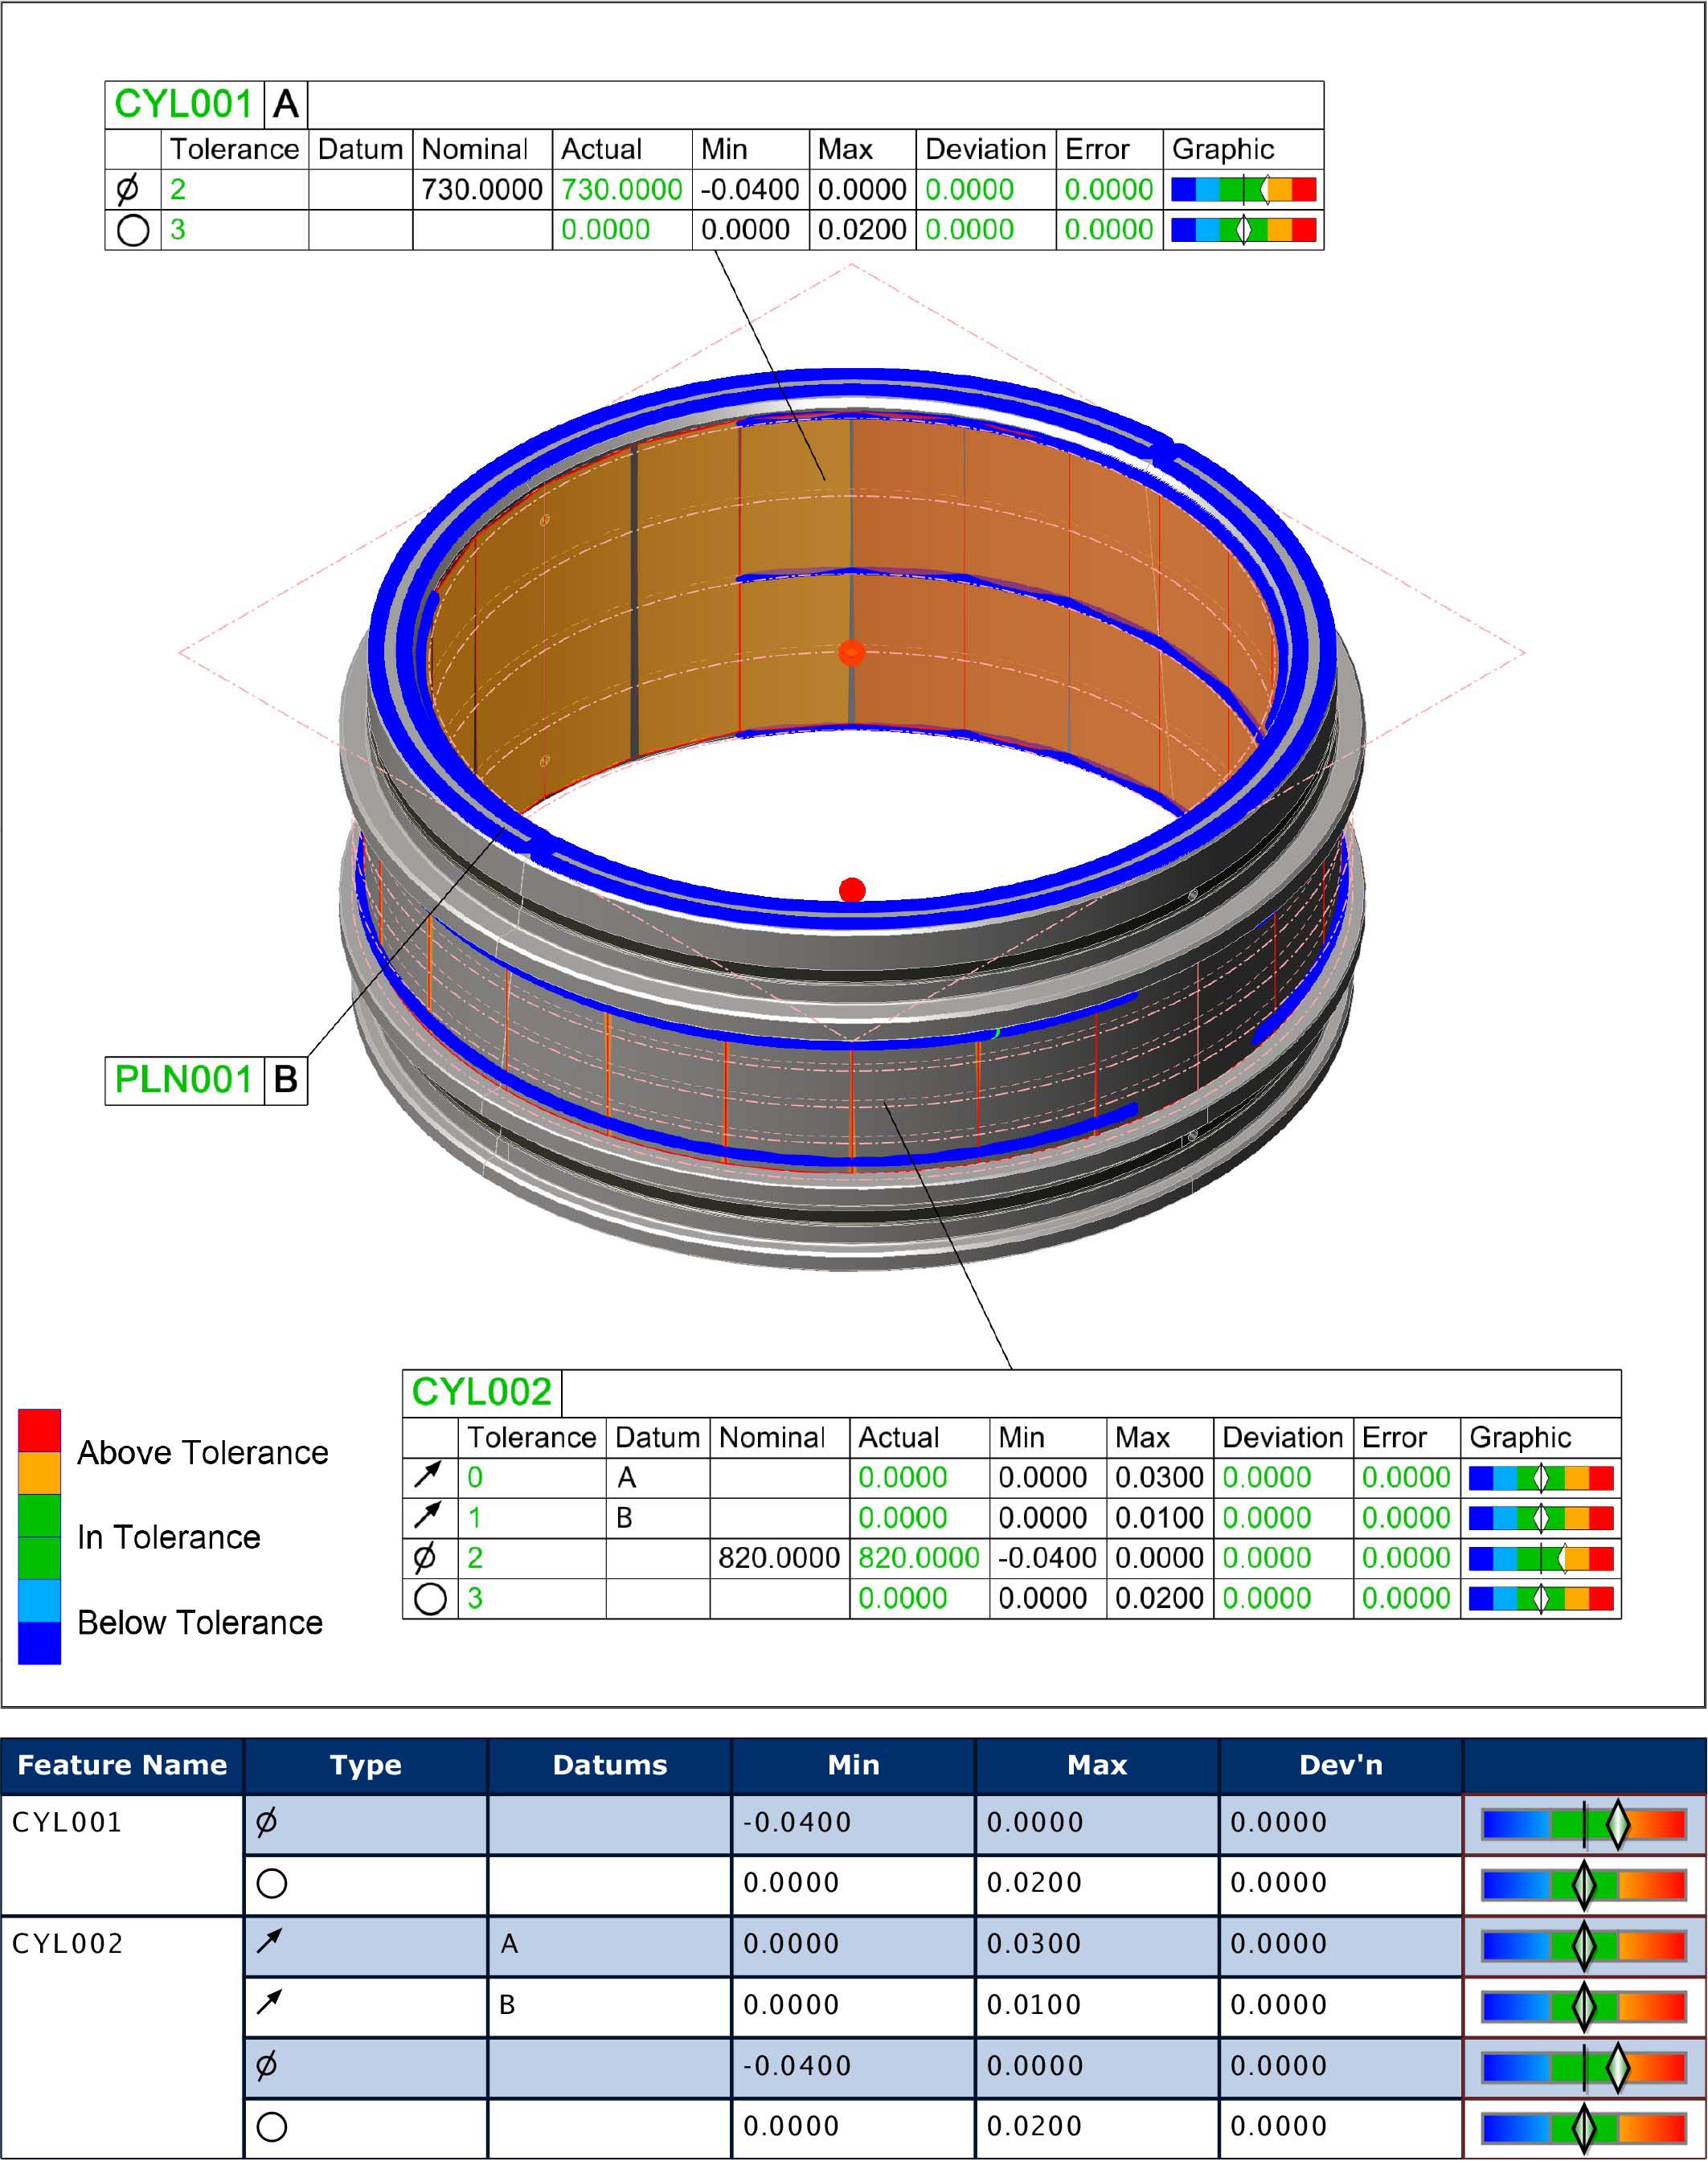 A typical quality report automatically generated in LK CAMIO 2021 after inspection of a Timken bearing.